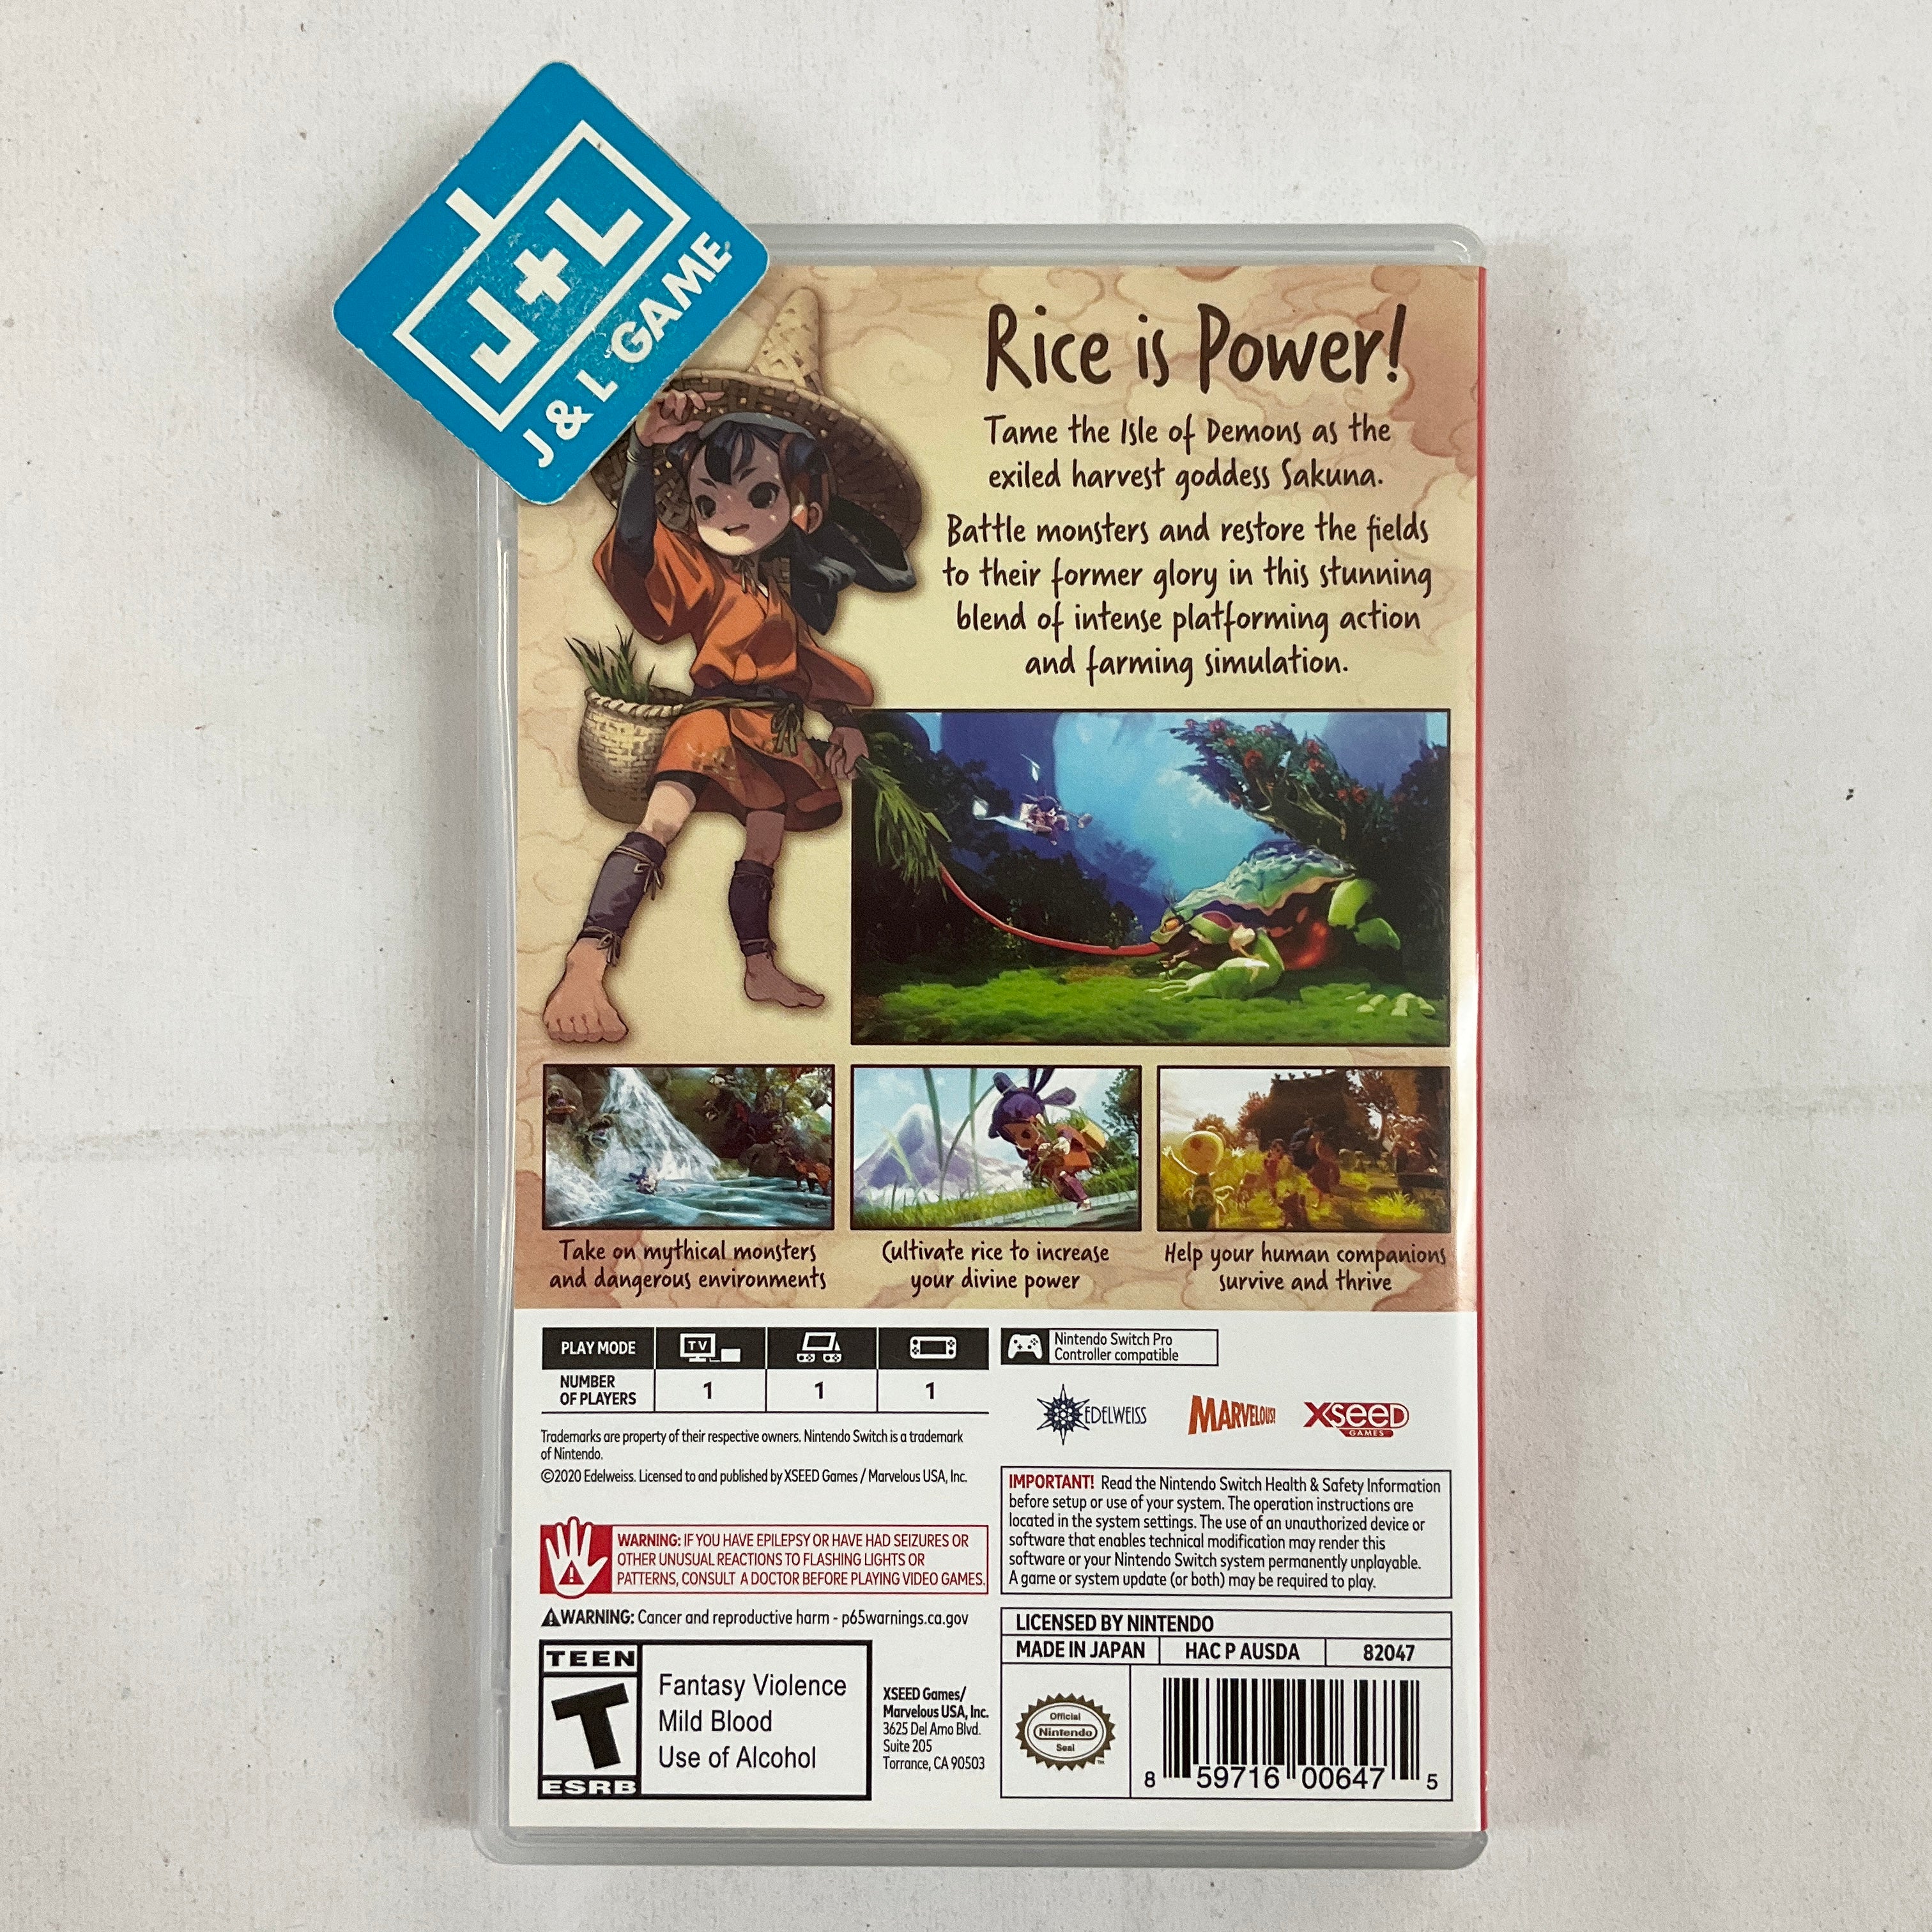 Sakuna: of Rice and Ruin - (NSW) Nintendo Switch [Pre-Owned] Video Games XSEED Games   